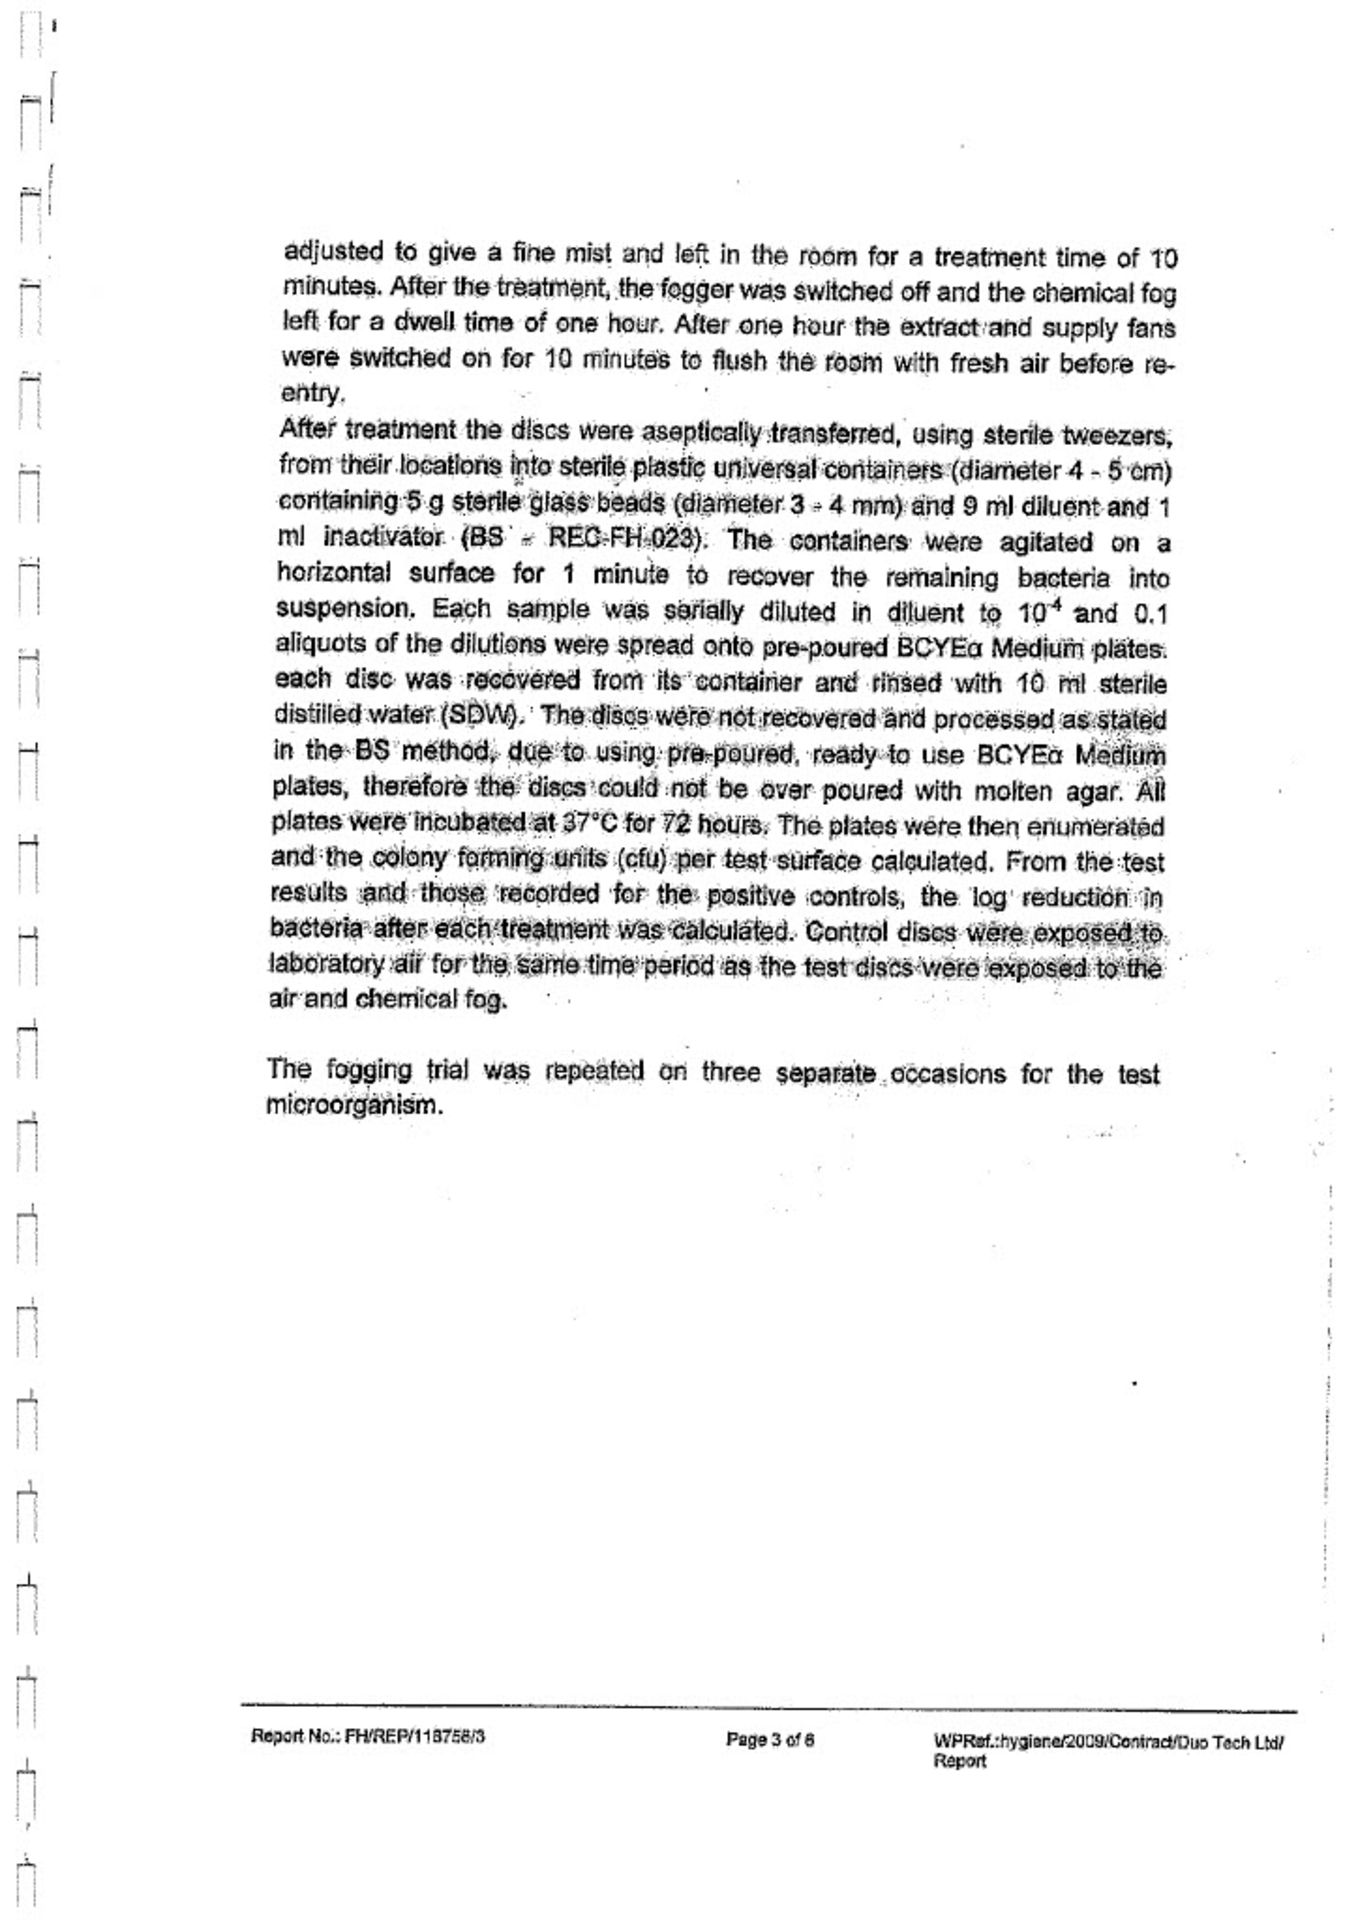 TANK OF DUOMAX SUPER CONCENTRATED DISINFECTANT, MADE IN UK, MARCH 2020, ALL DOCUMENTS ATTACHED - Image 72 of 75